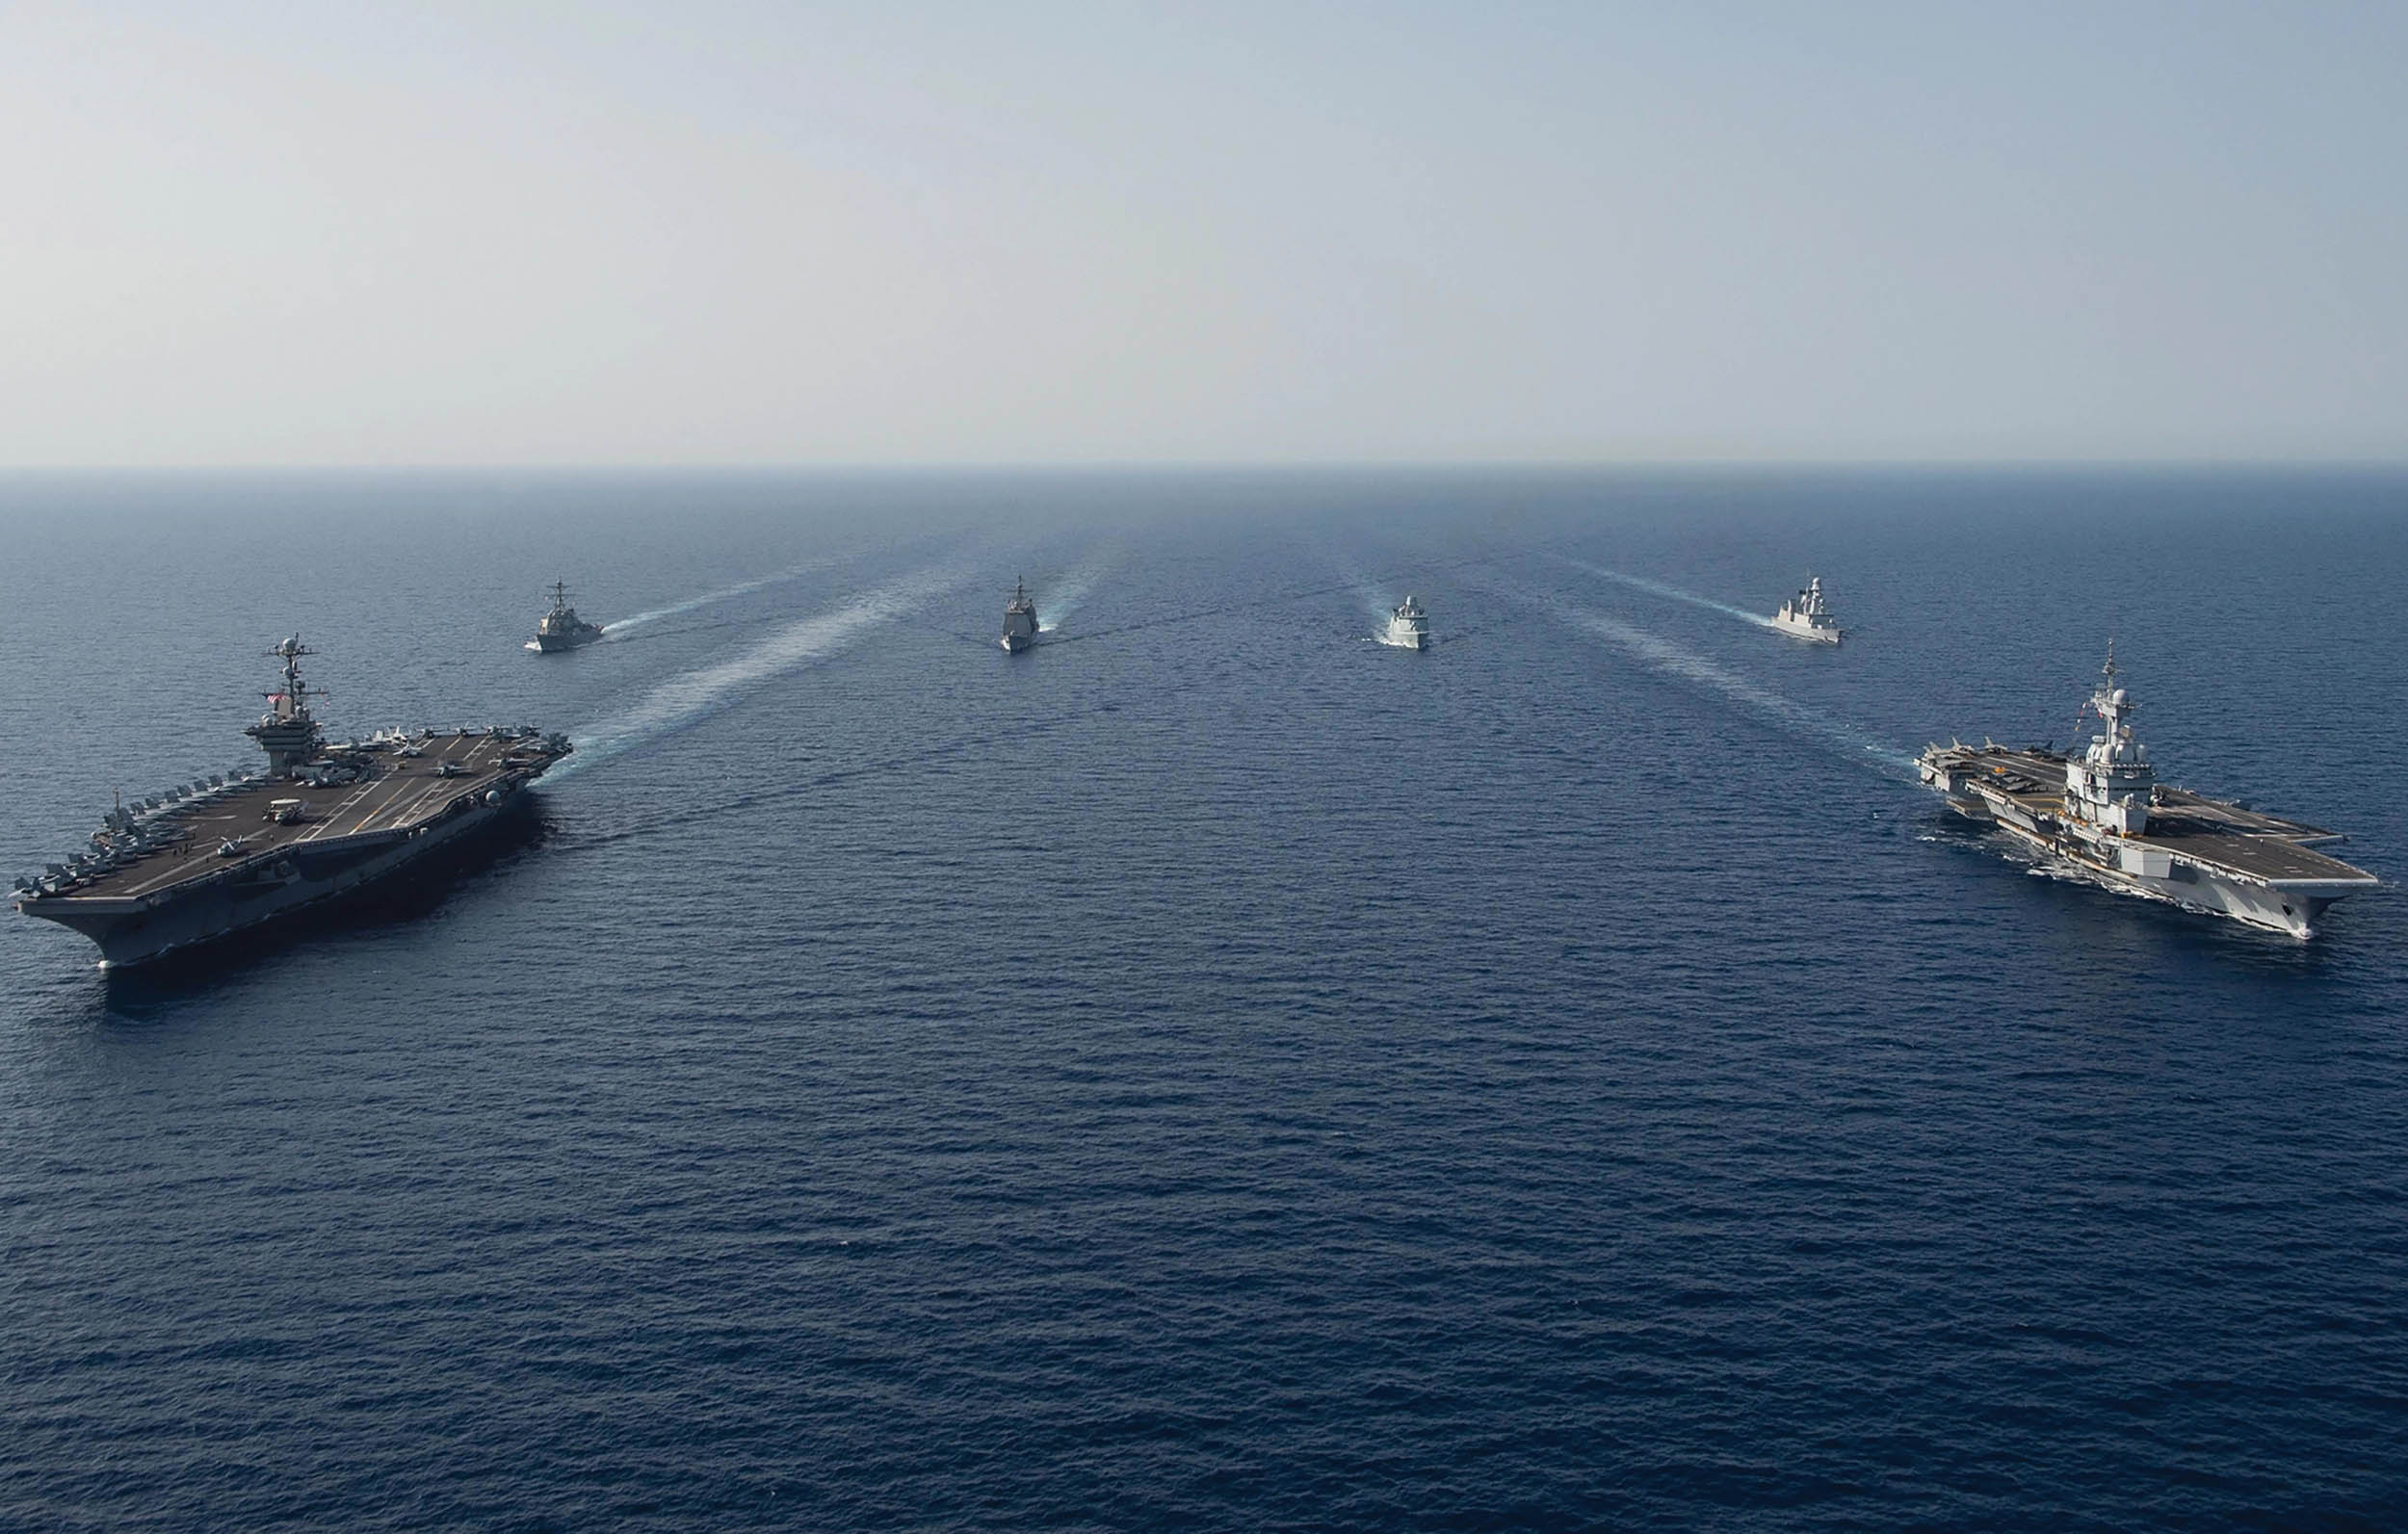 Aircraft carrier USS John C. Stennis, front left, French Marine Nationale aircraft carrier FS Charles de Gaulle, front right, guided-missile destroyer USS McFaul, guided-missile cruiser USS Mobile Bay, Royal Danish navy frigate HDMS Niels Juel, and French air defense destroyer FS Forbin transit in formation in Red Sea, April 15, 2019 (U.S. Navy/Skyler Okerman)